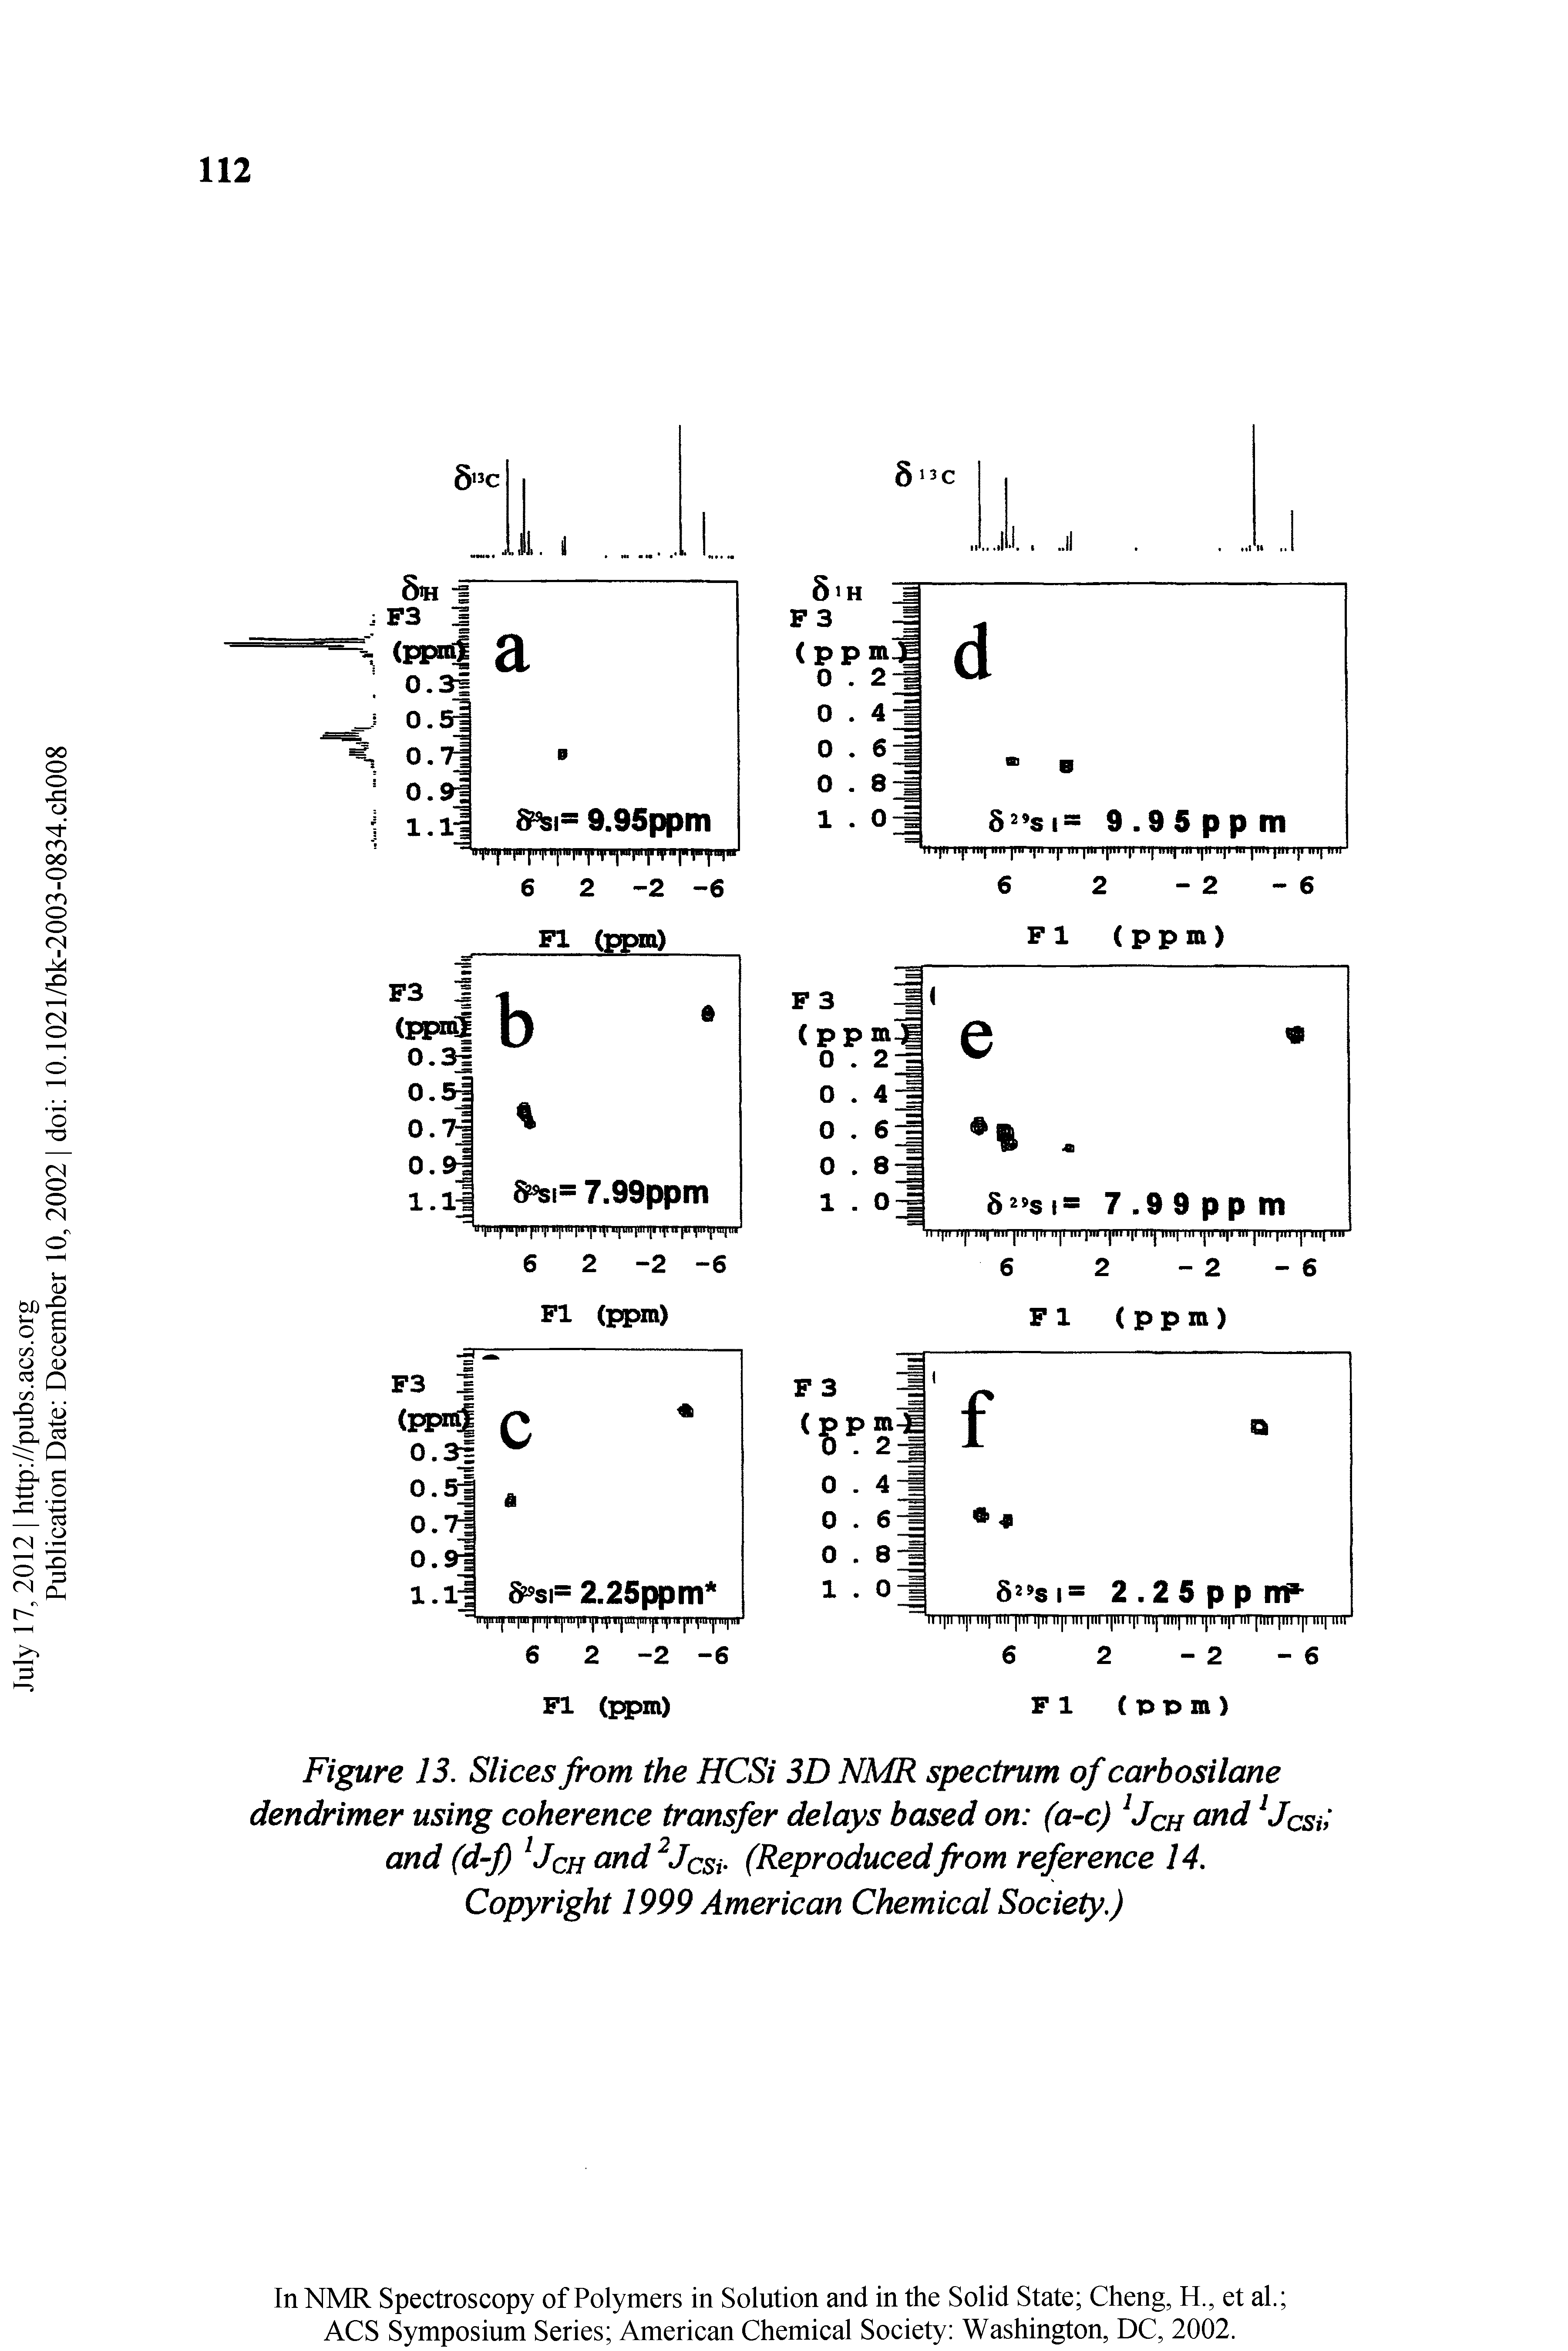 Figure 13. Slices from the HCSi 3D NMR spectrum of carbosilane dendrimer using coherence transfer delays based on (a c) Jch Jcsu and (d f) Jqh and Jcsv (Reproducedfrom reference 14. Copyright 1999 American Chemical Society.)...